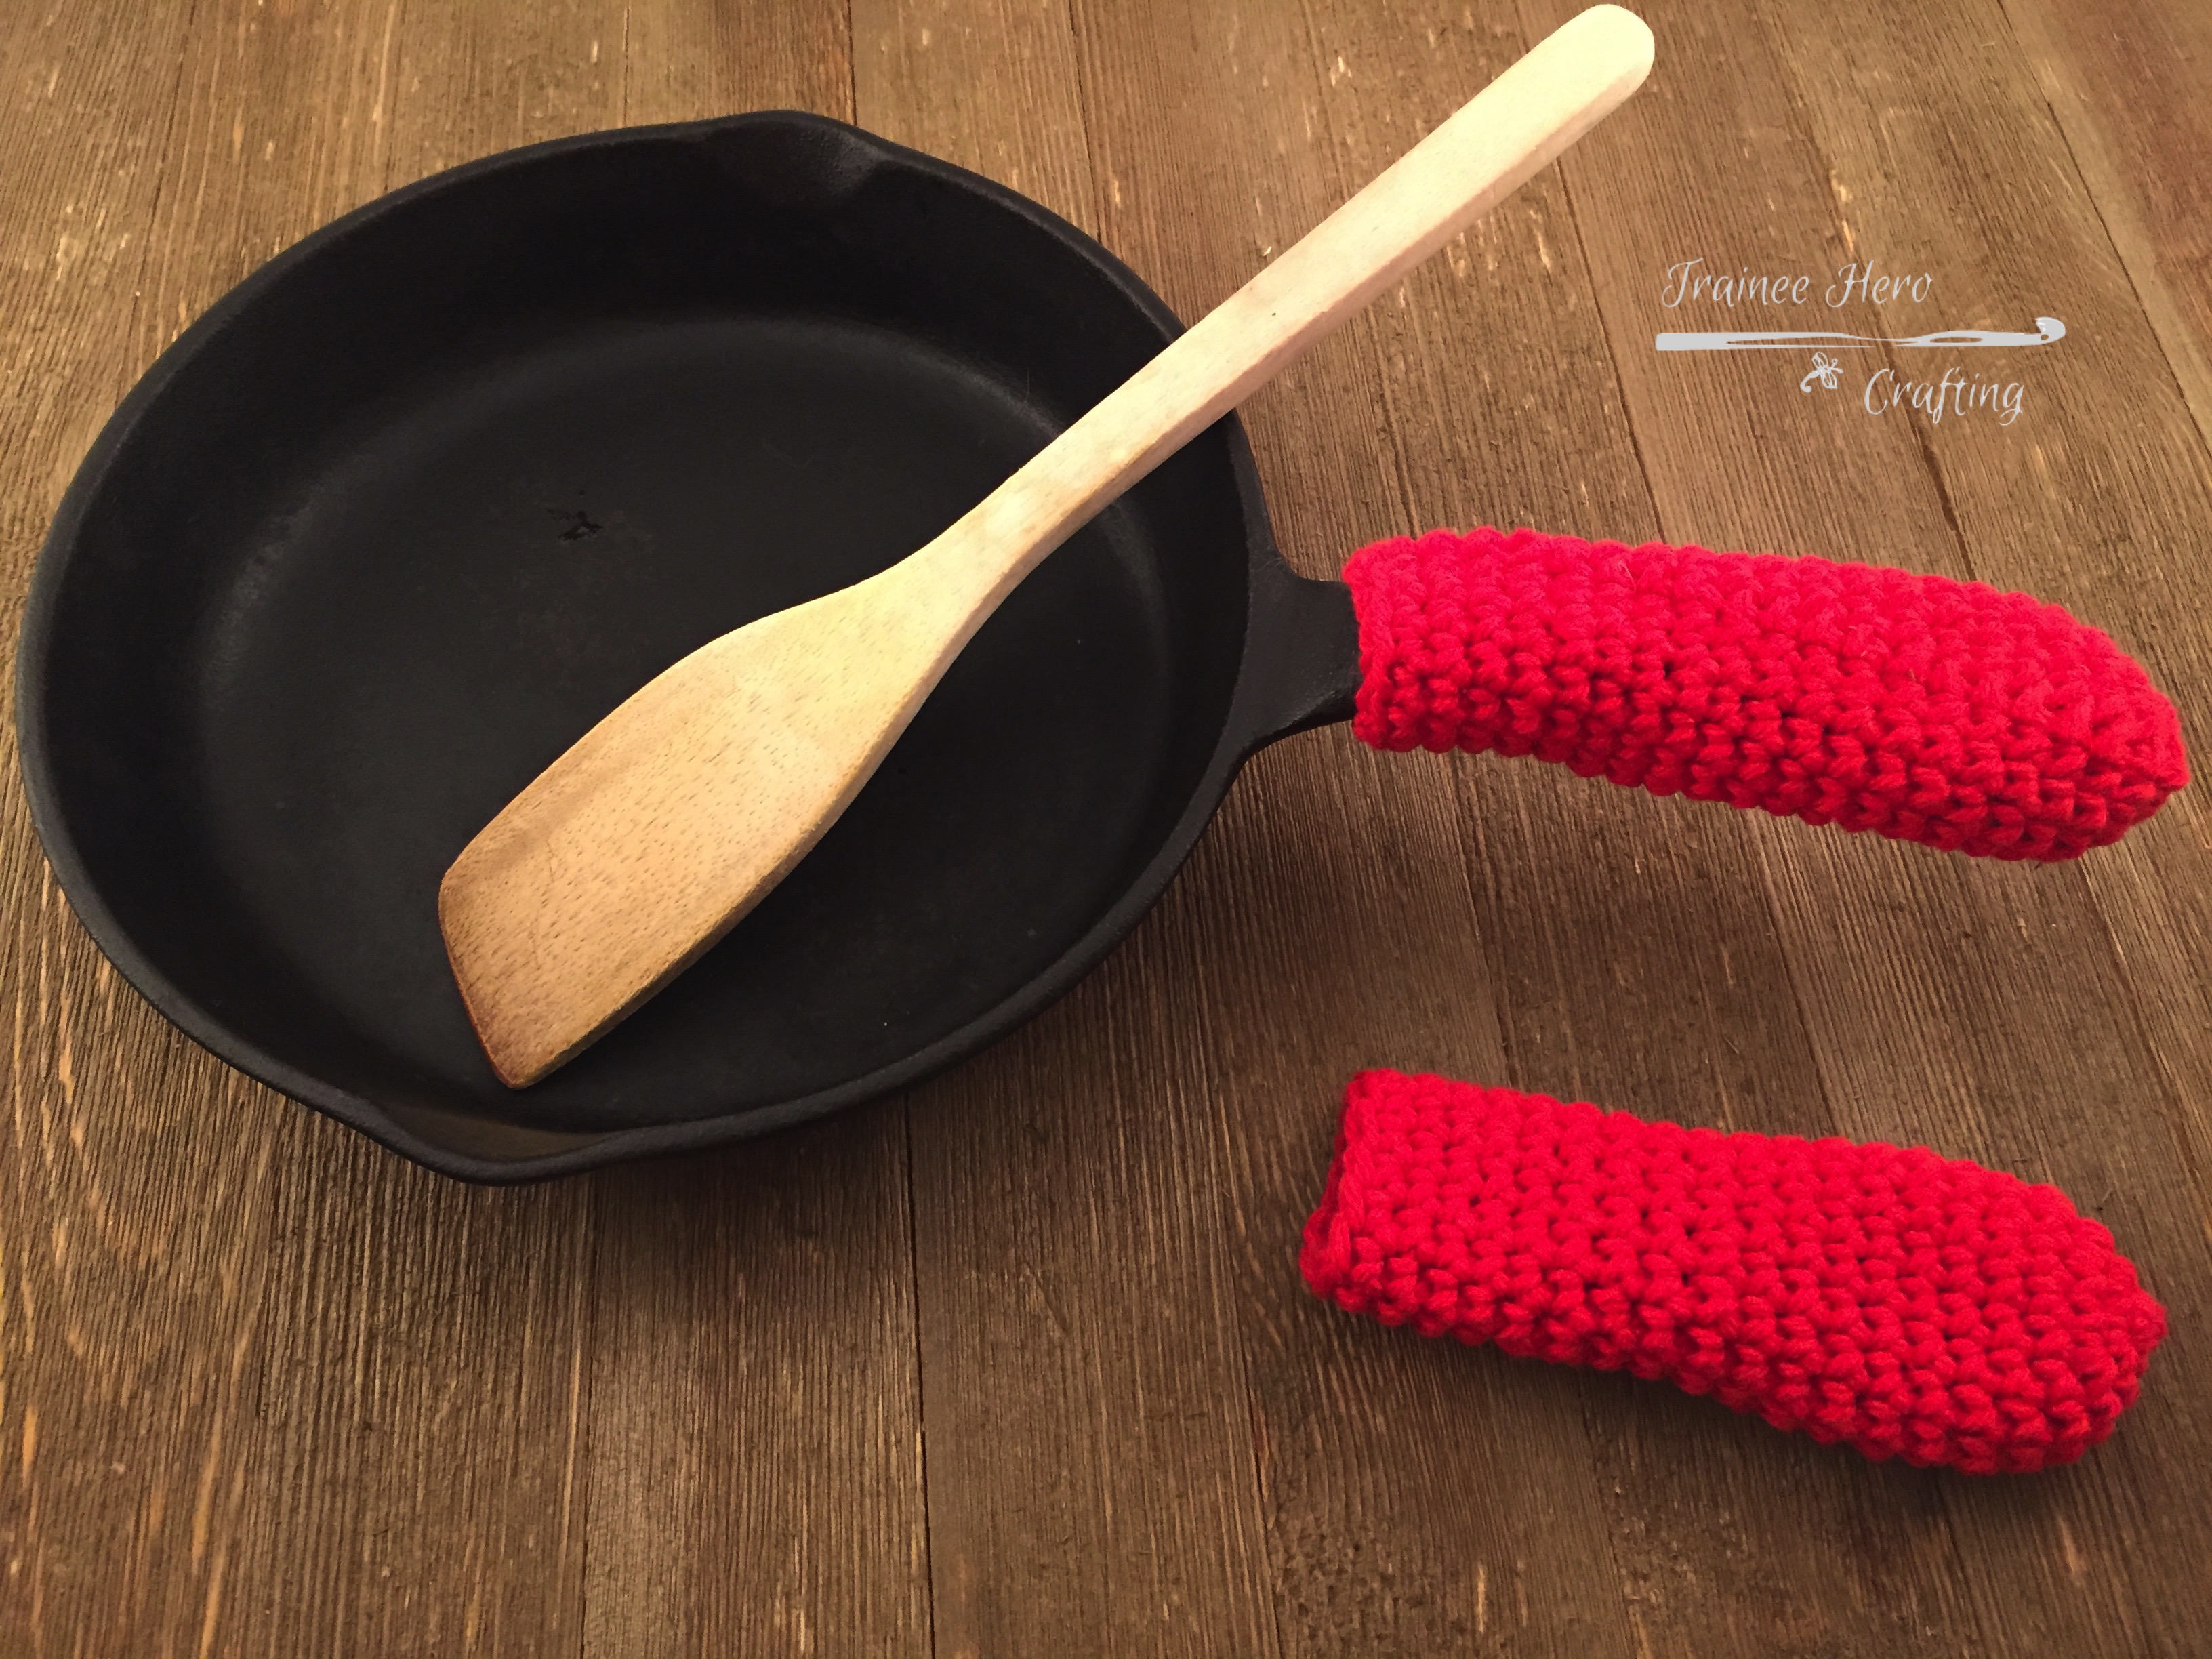 Crochet Handle Covers for Skillets: Free crochet pattern - Trainee Hero  Creative Life